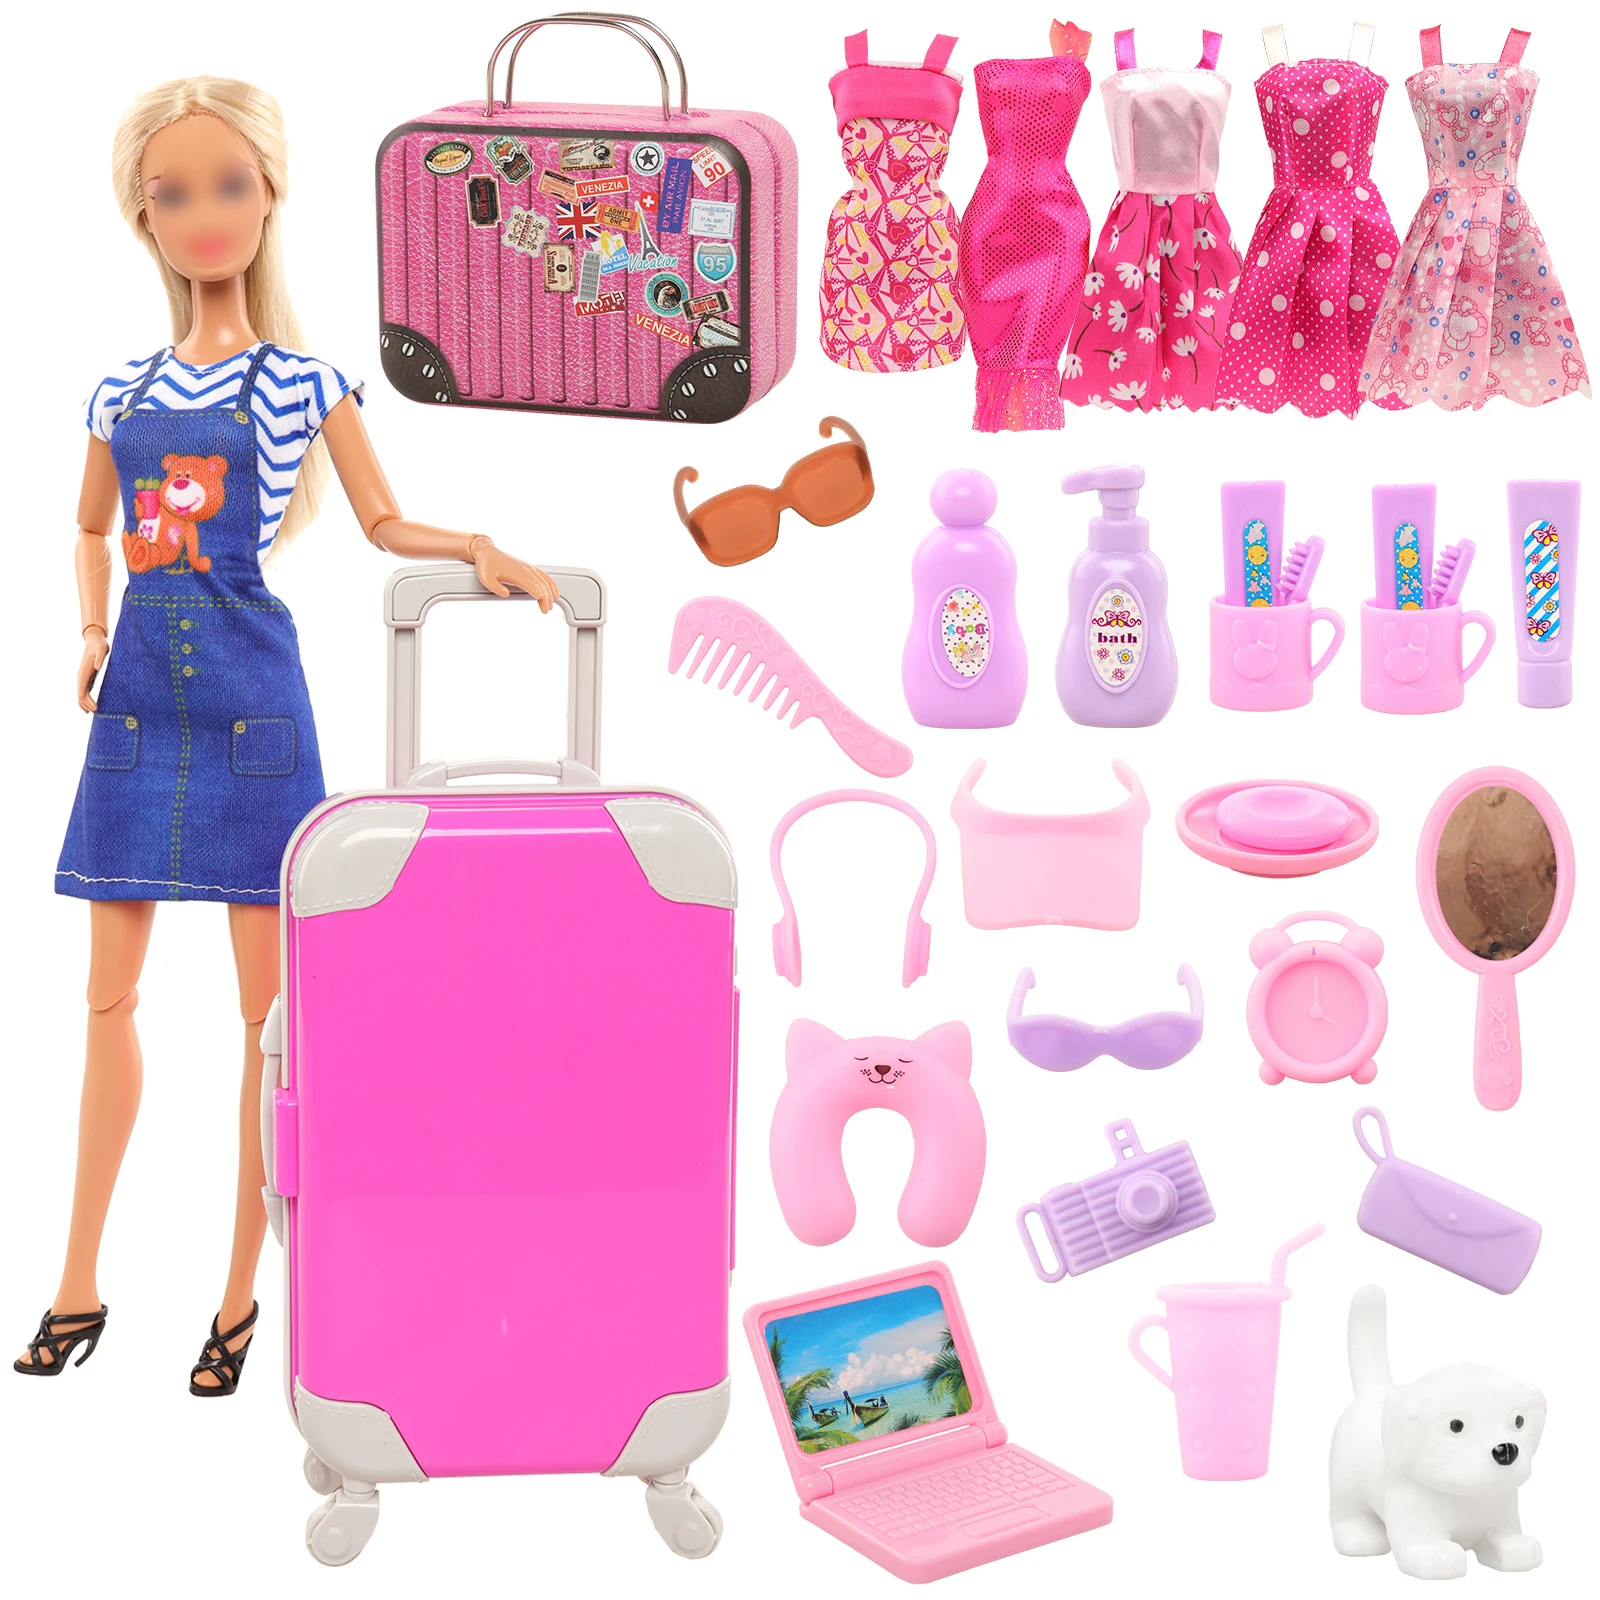 BARWA 30 Pcs 11.5 Inch Travel Furniture Fashion For Barbie Clothes and - £16.93 GBP